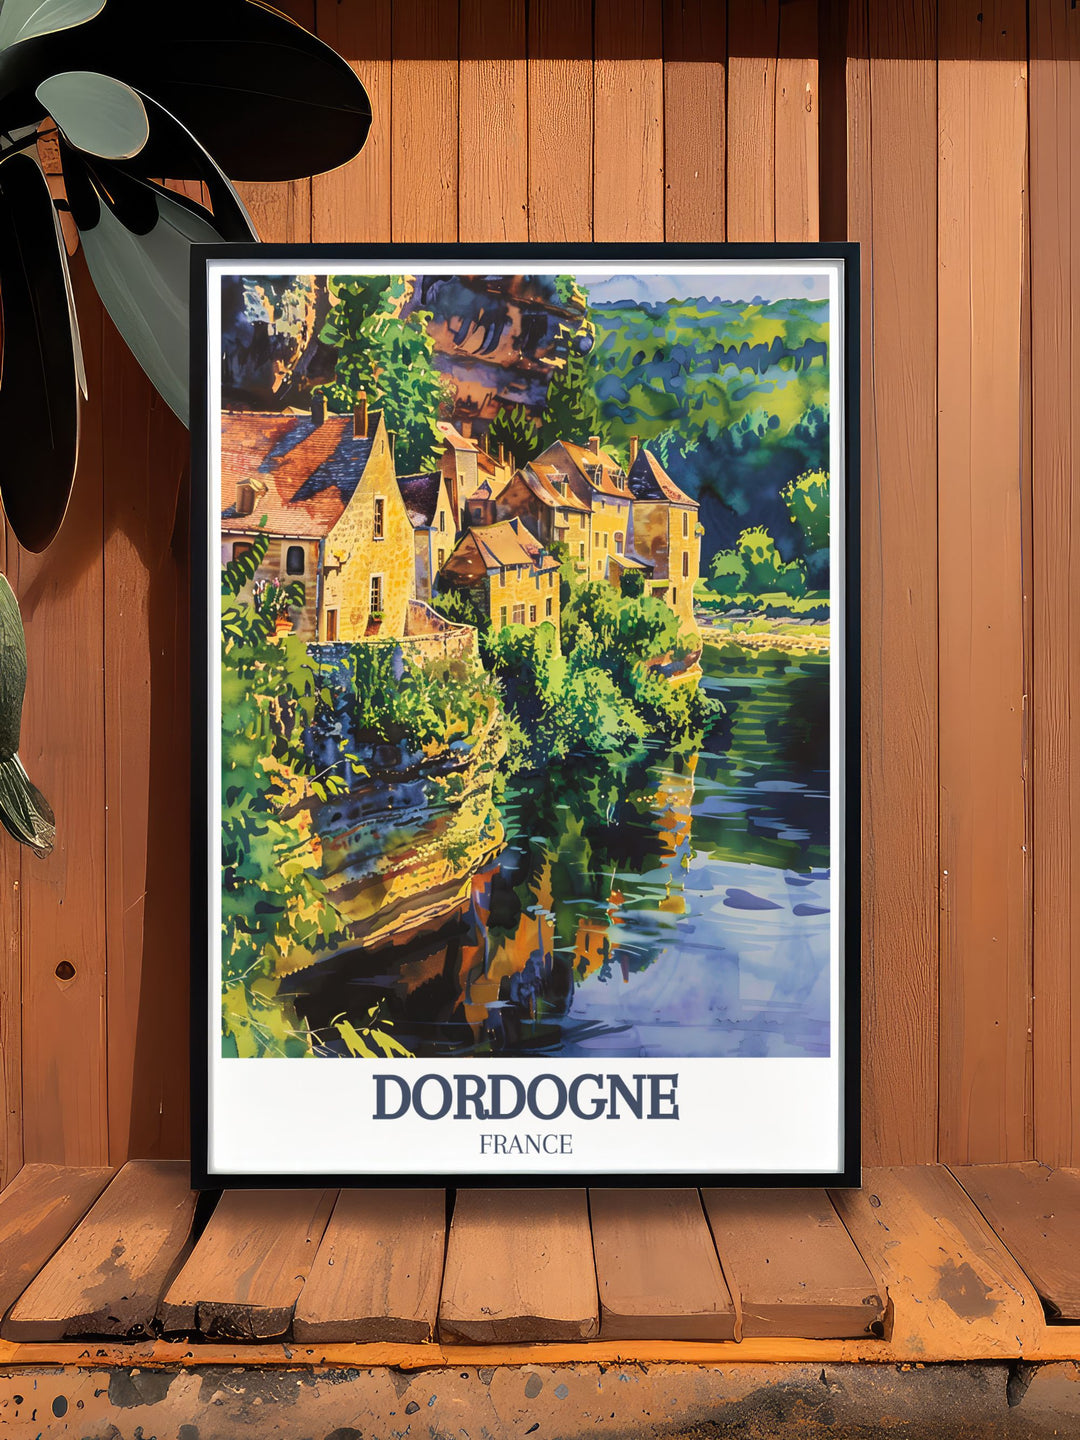 Elegant Dordogne River and La Roque Gageac wall decor featuring a vibrant digital print of this historic region a unique and stunning piece for any space